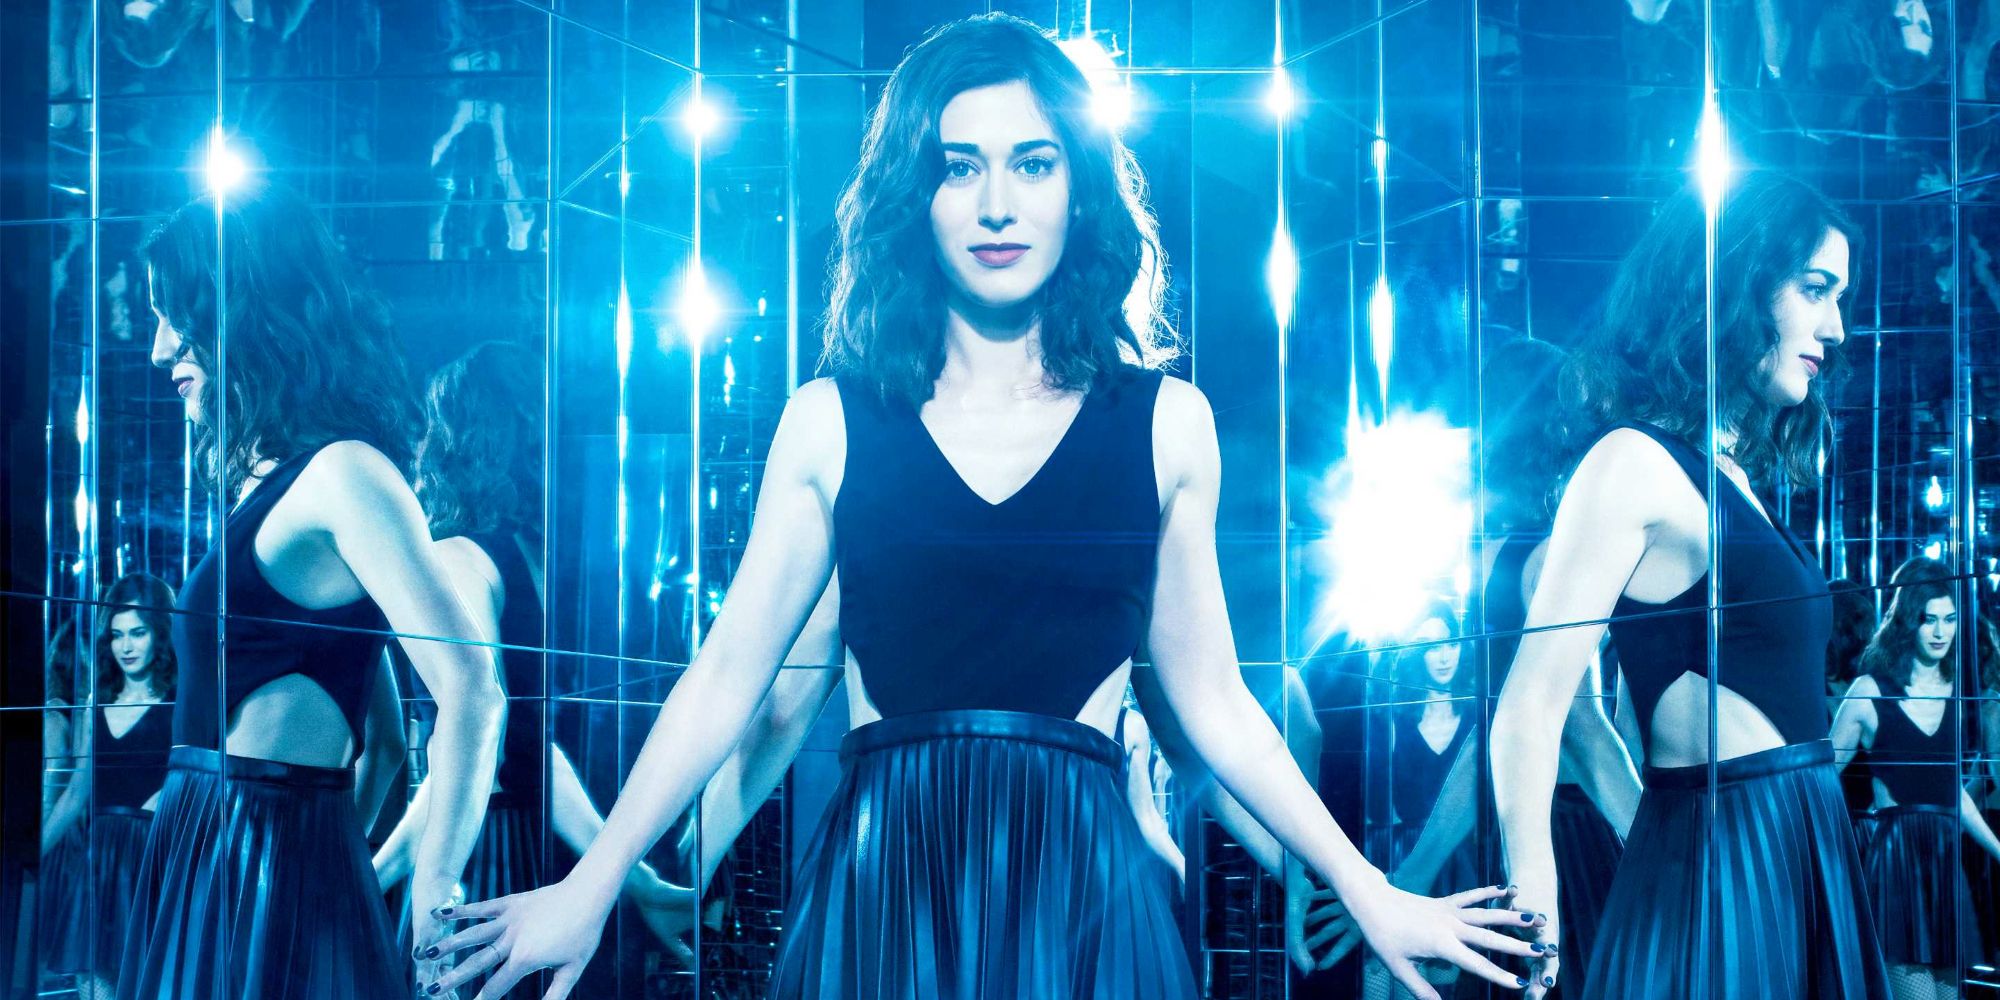 Lizzy Caplan as Lula posing in a mirrored room in Now You See Me 2